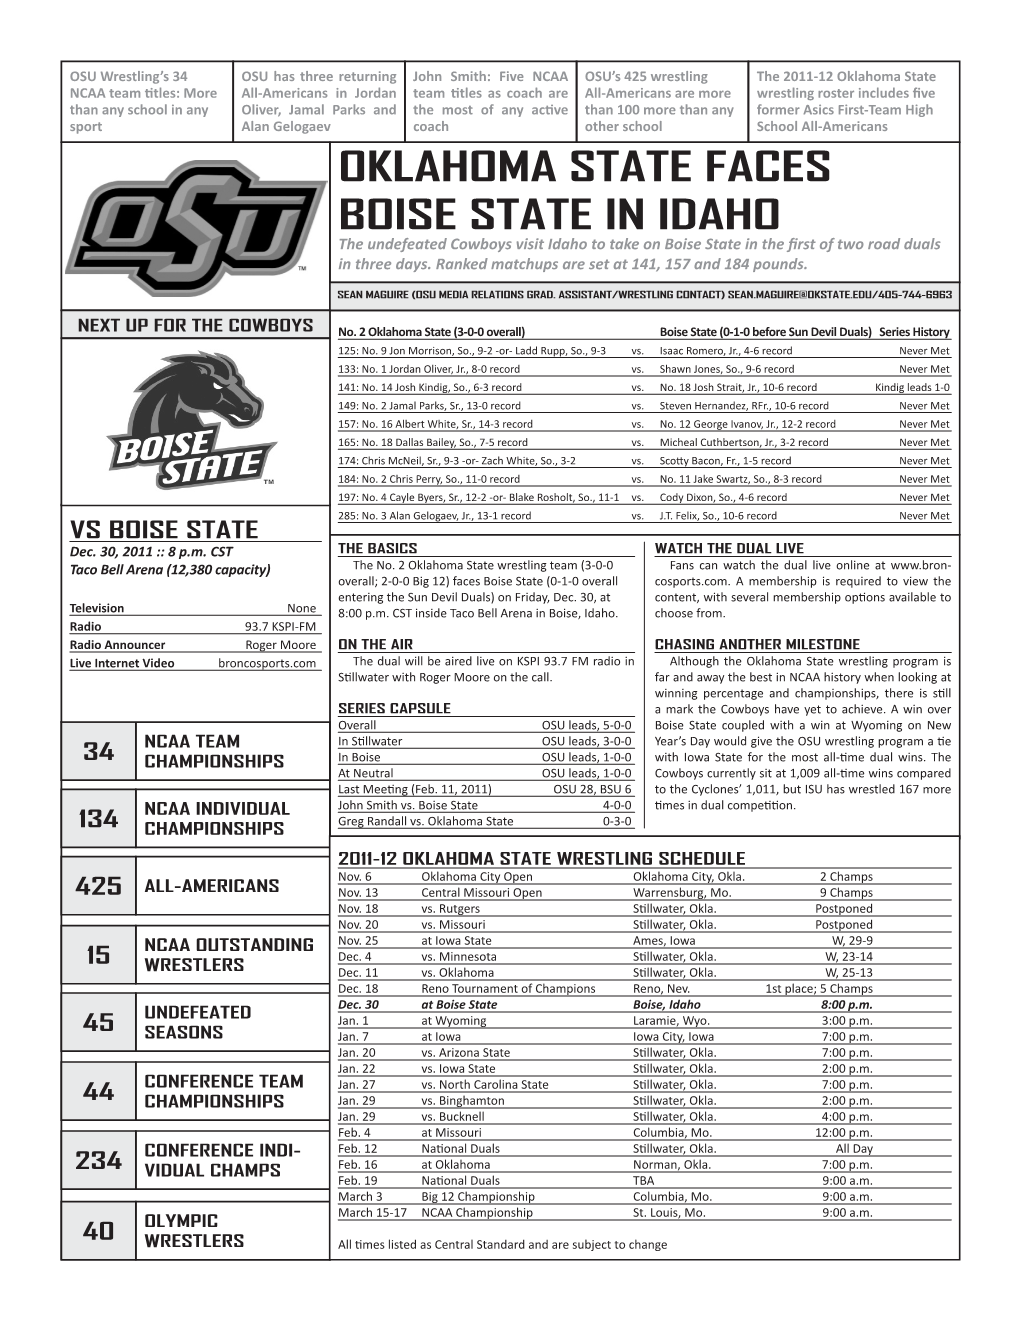 OKLAHOMA STATE FACES BOISE STATE in IDAHO the Undefeated Cowboys Visit Idaho to Take on Boise State in the First of Two Road Duals in Three Days